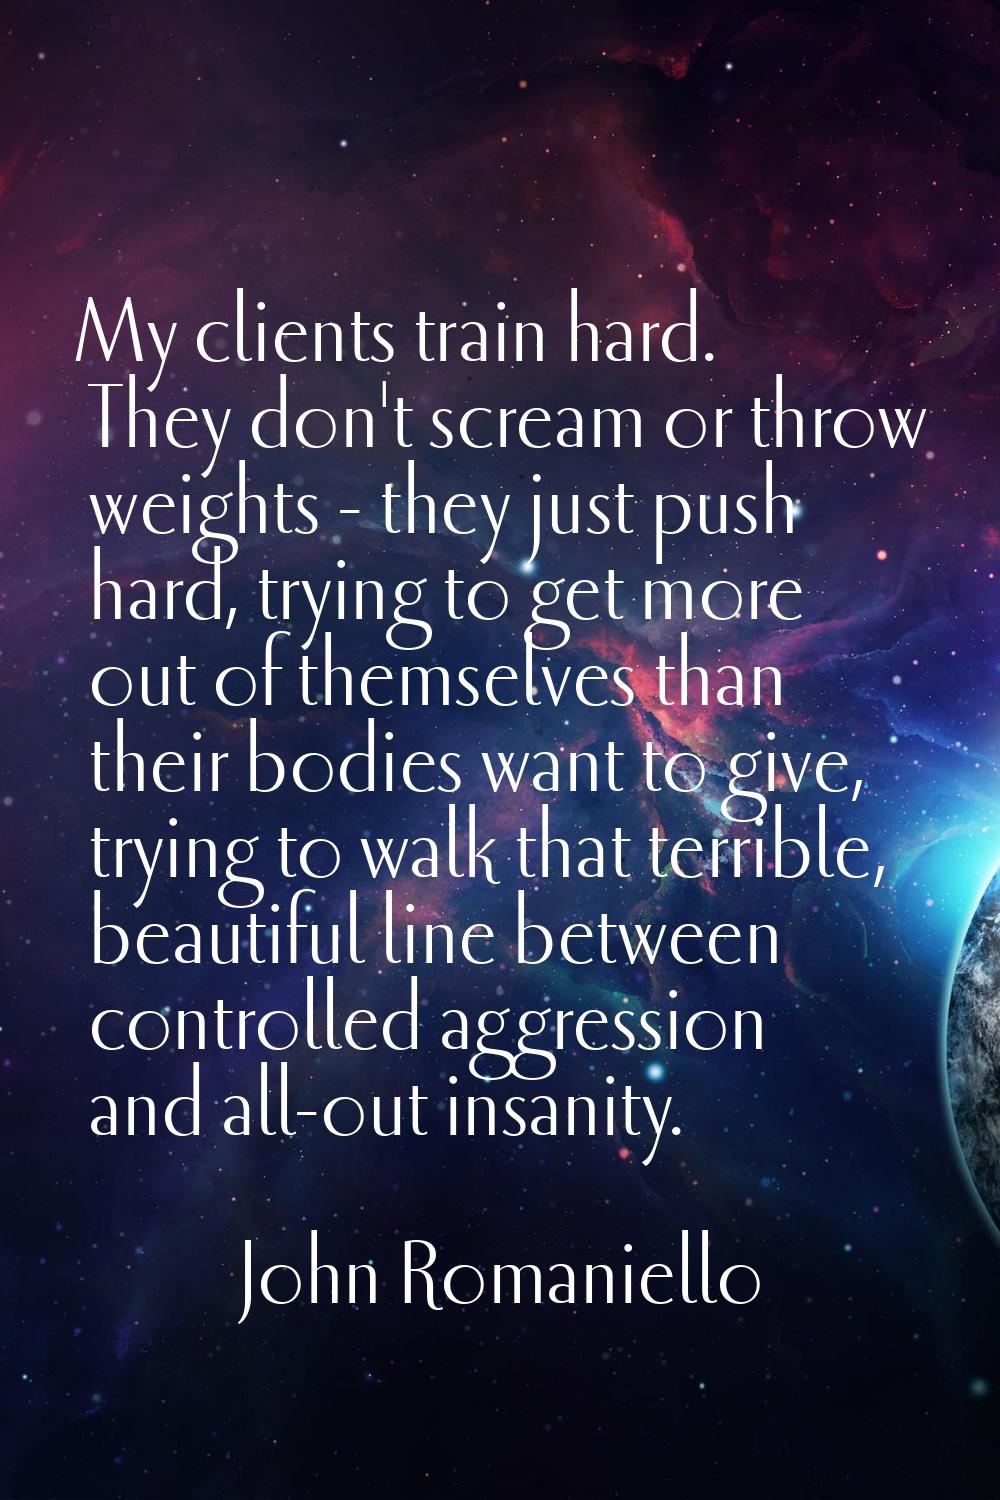 My clients train hard. They don't scream or throw weights - they just push hard, trying to get more